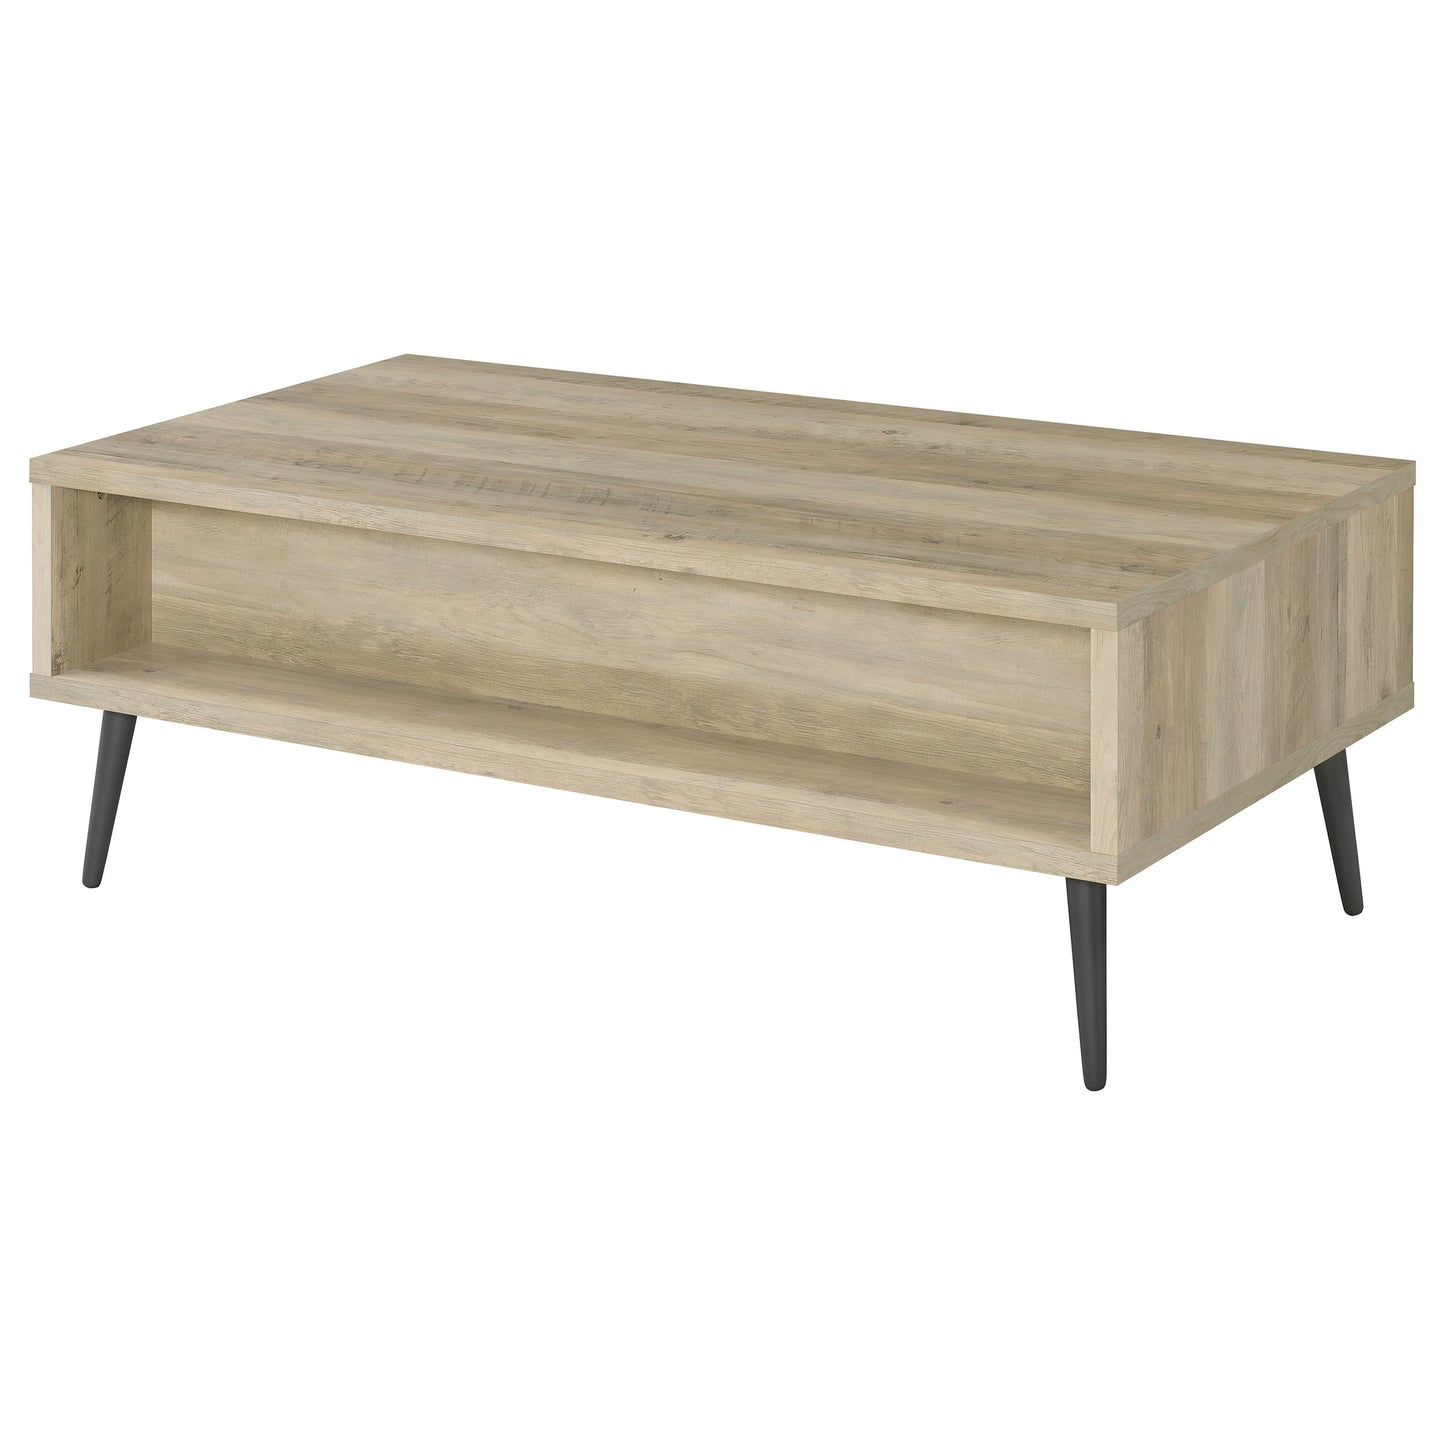 Welsh 1-drawer Engineered Wood Coffee Table Antique Pine